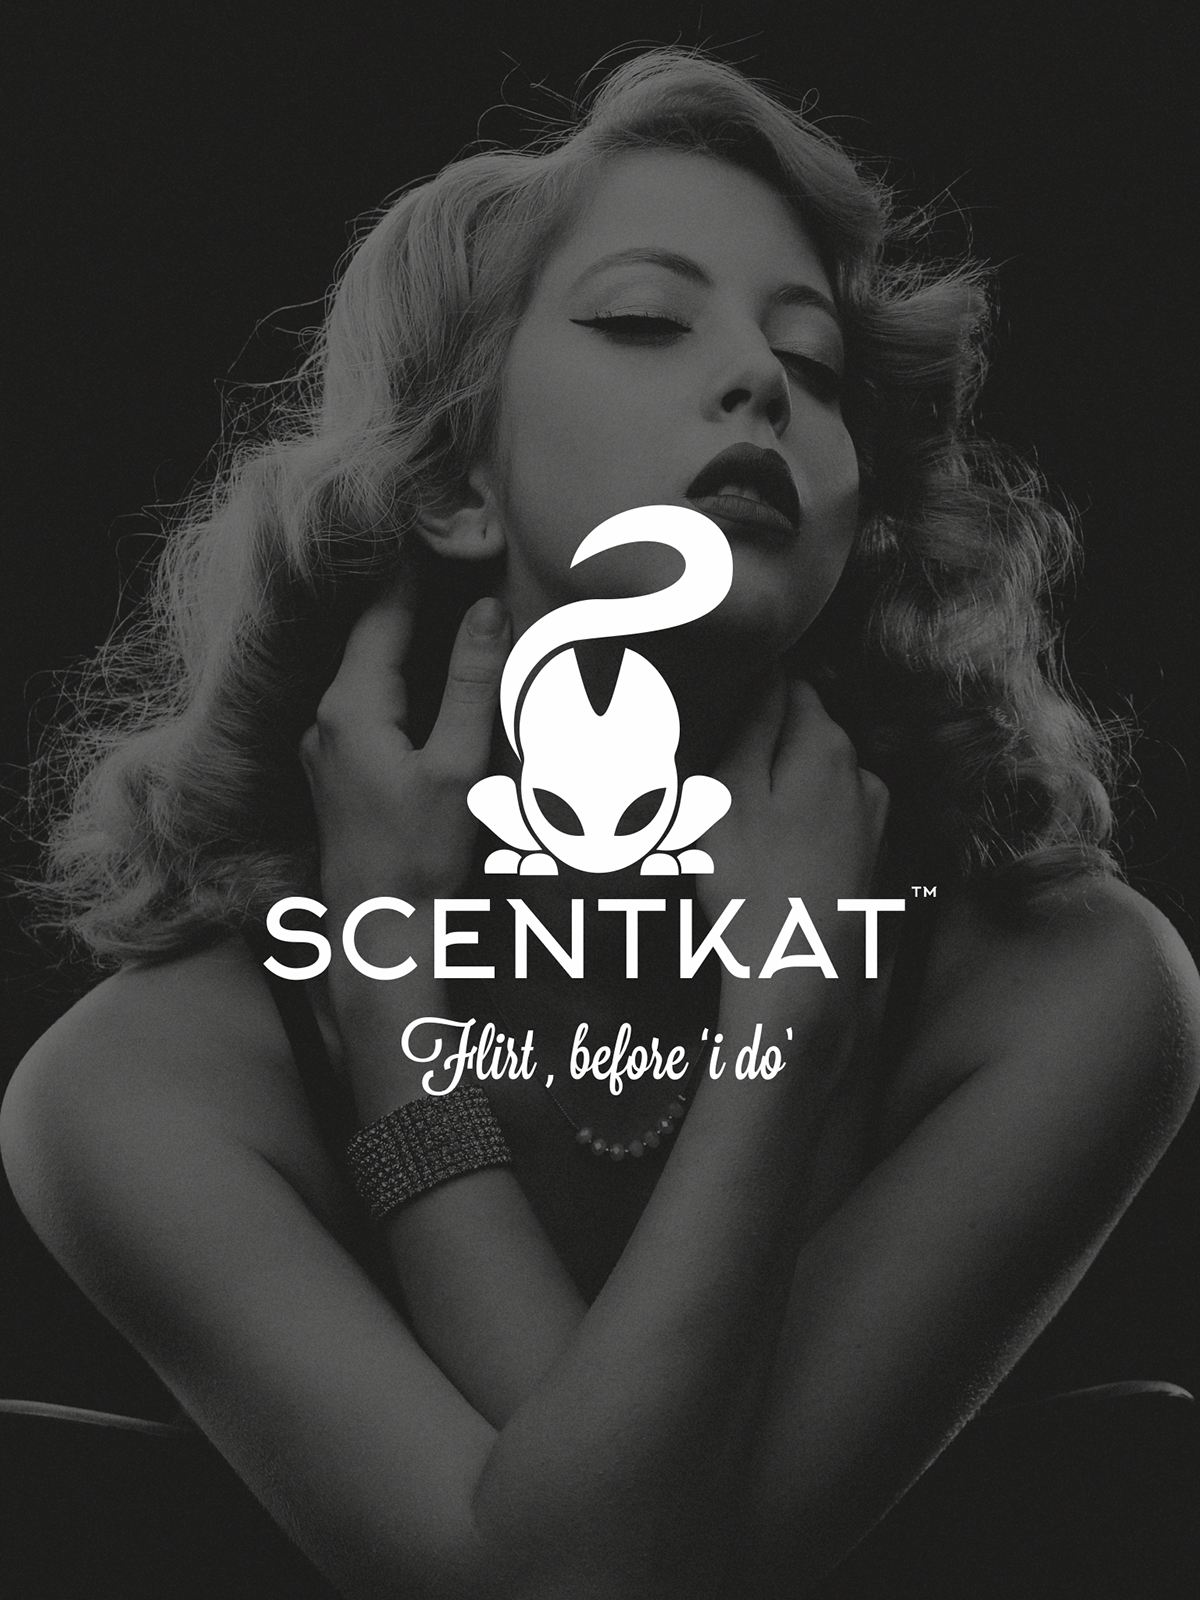 Perfumes colognes subscription scentkat online logo business identity exclusive cosmetics